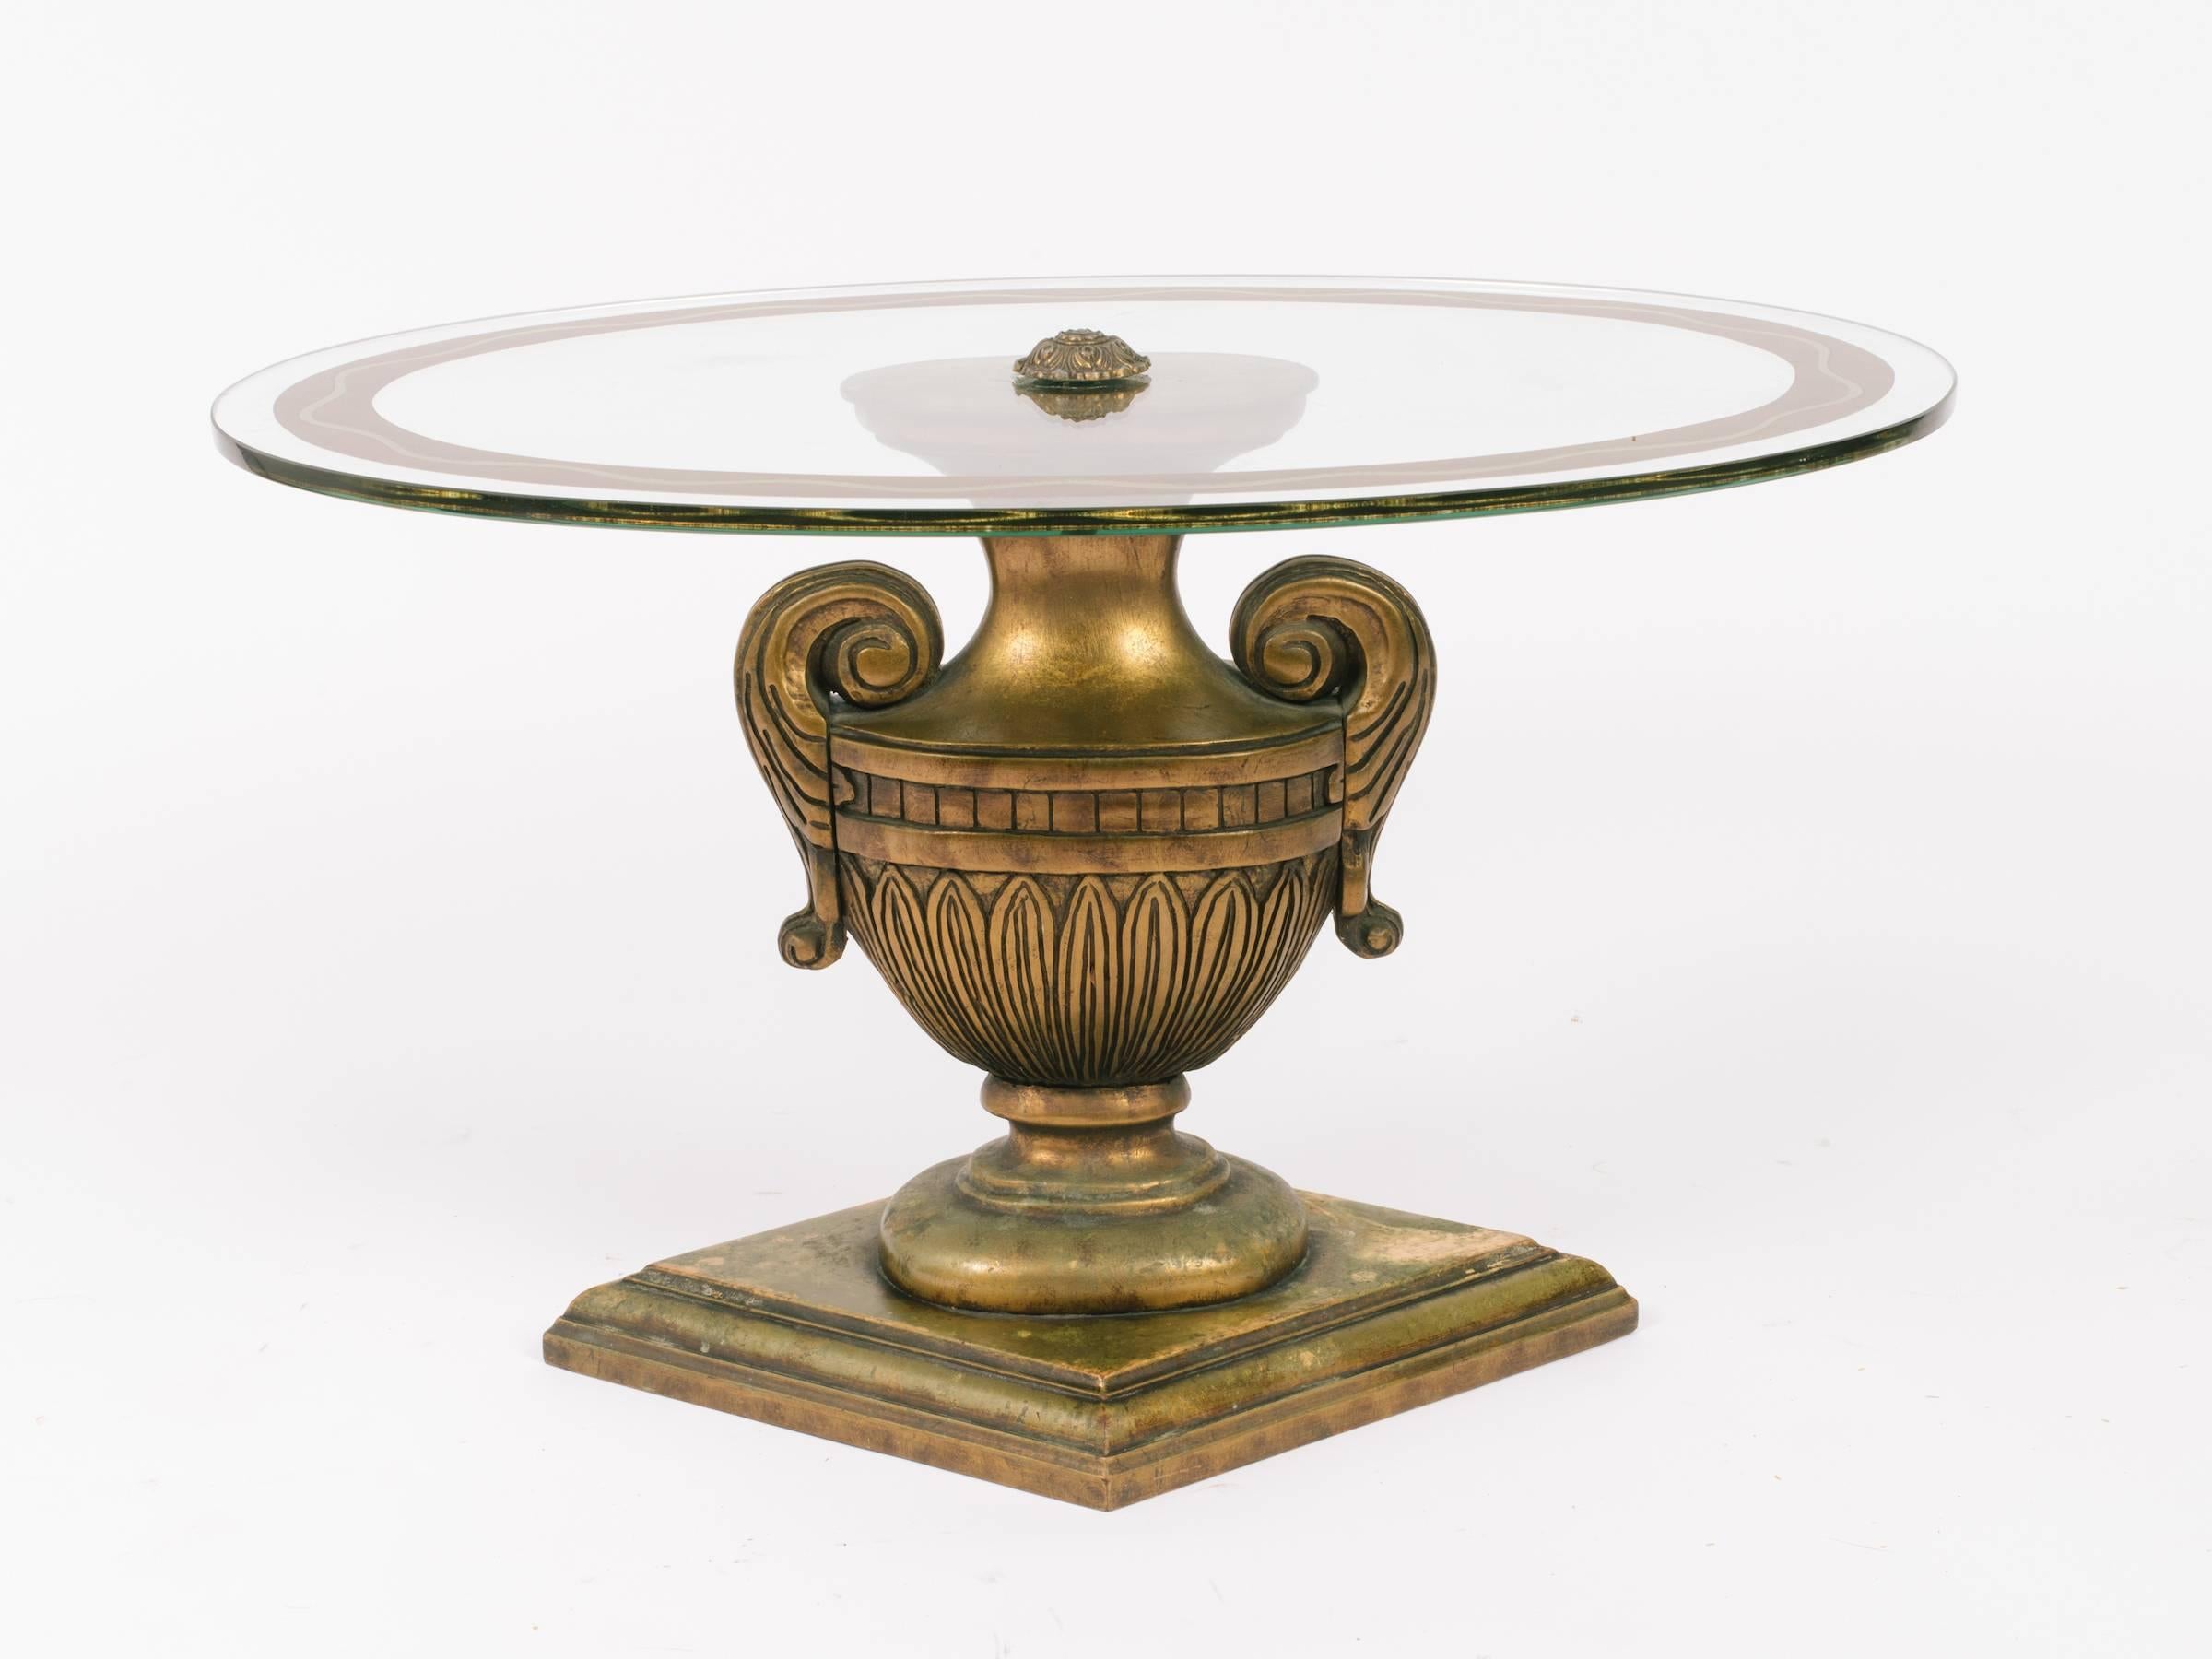 Pair of 1950s, Italian carved wood urn side tables. Glass tops have an etched painted trim.